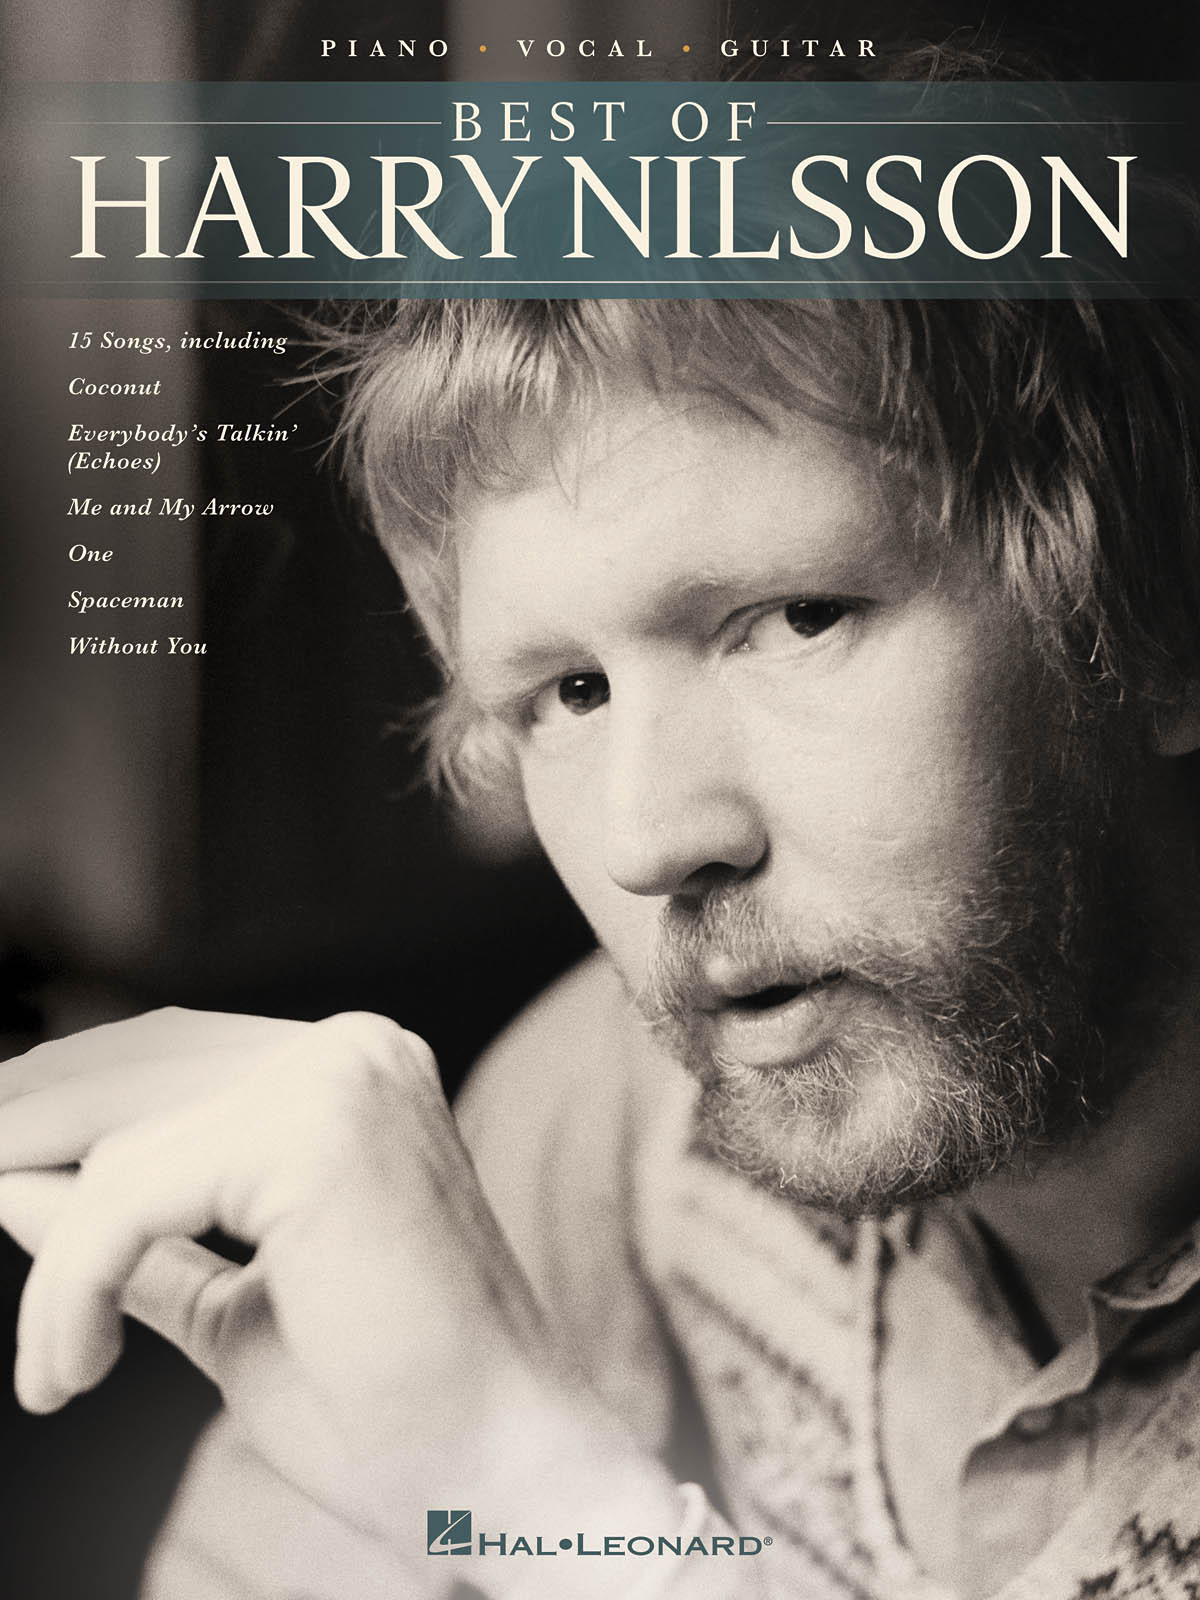 Harry Nilsson one only Vocal. Harry Nilsson - the best of ' 2009 CD Covers.